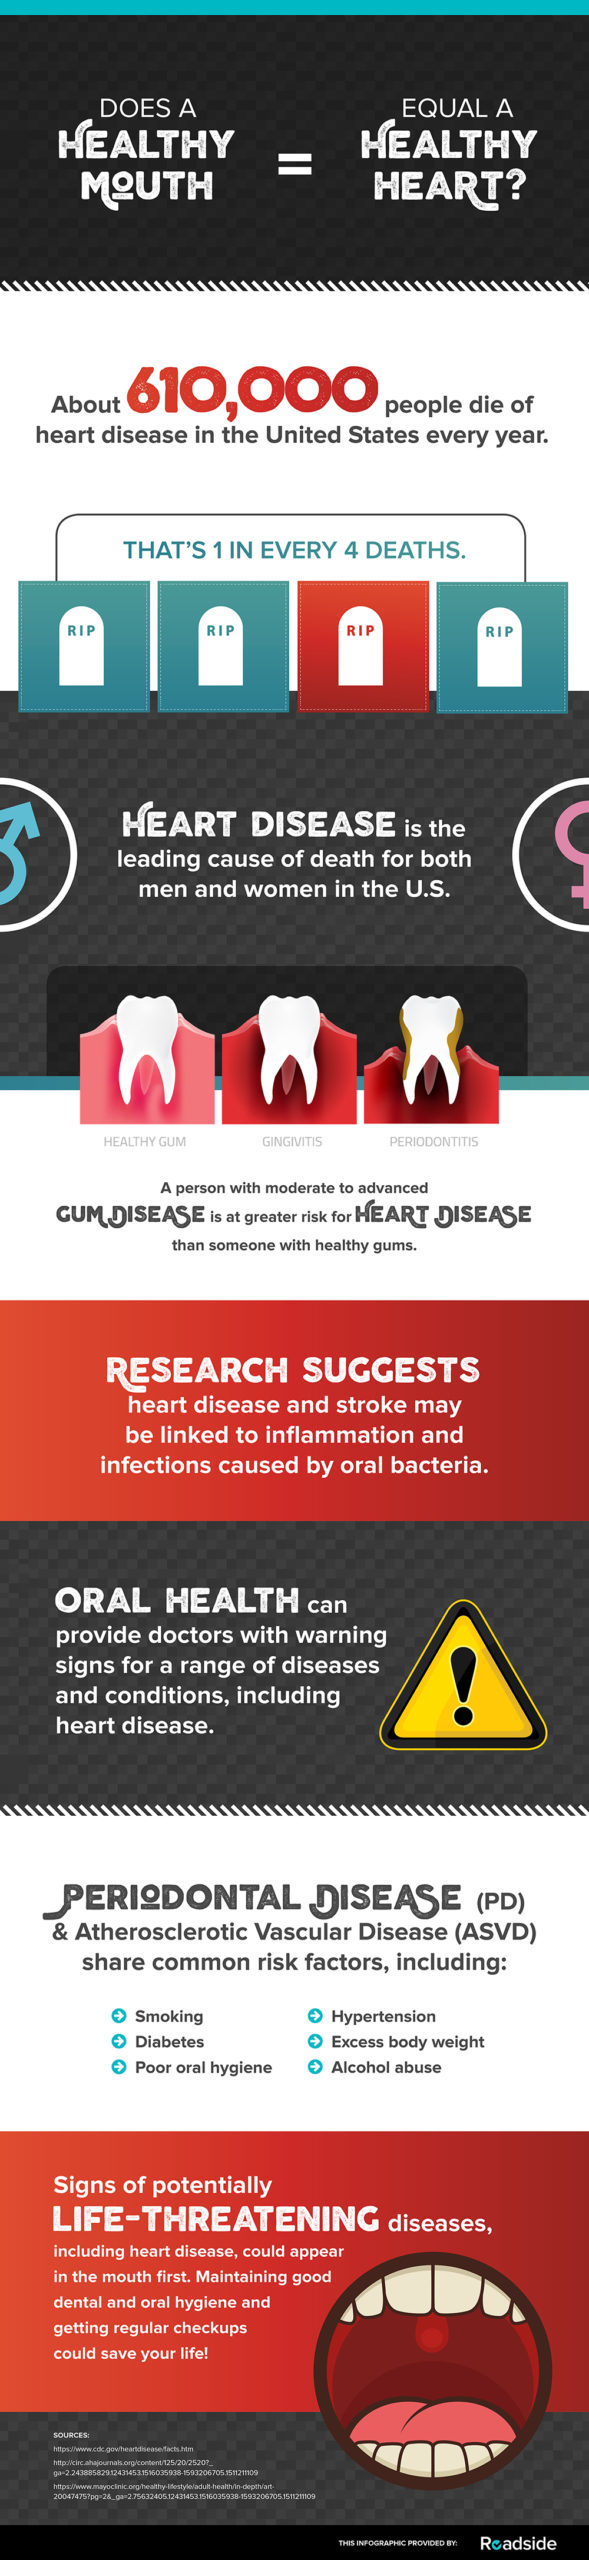 Healthy mouth = healthy heart infographic